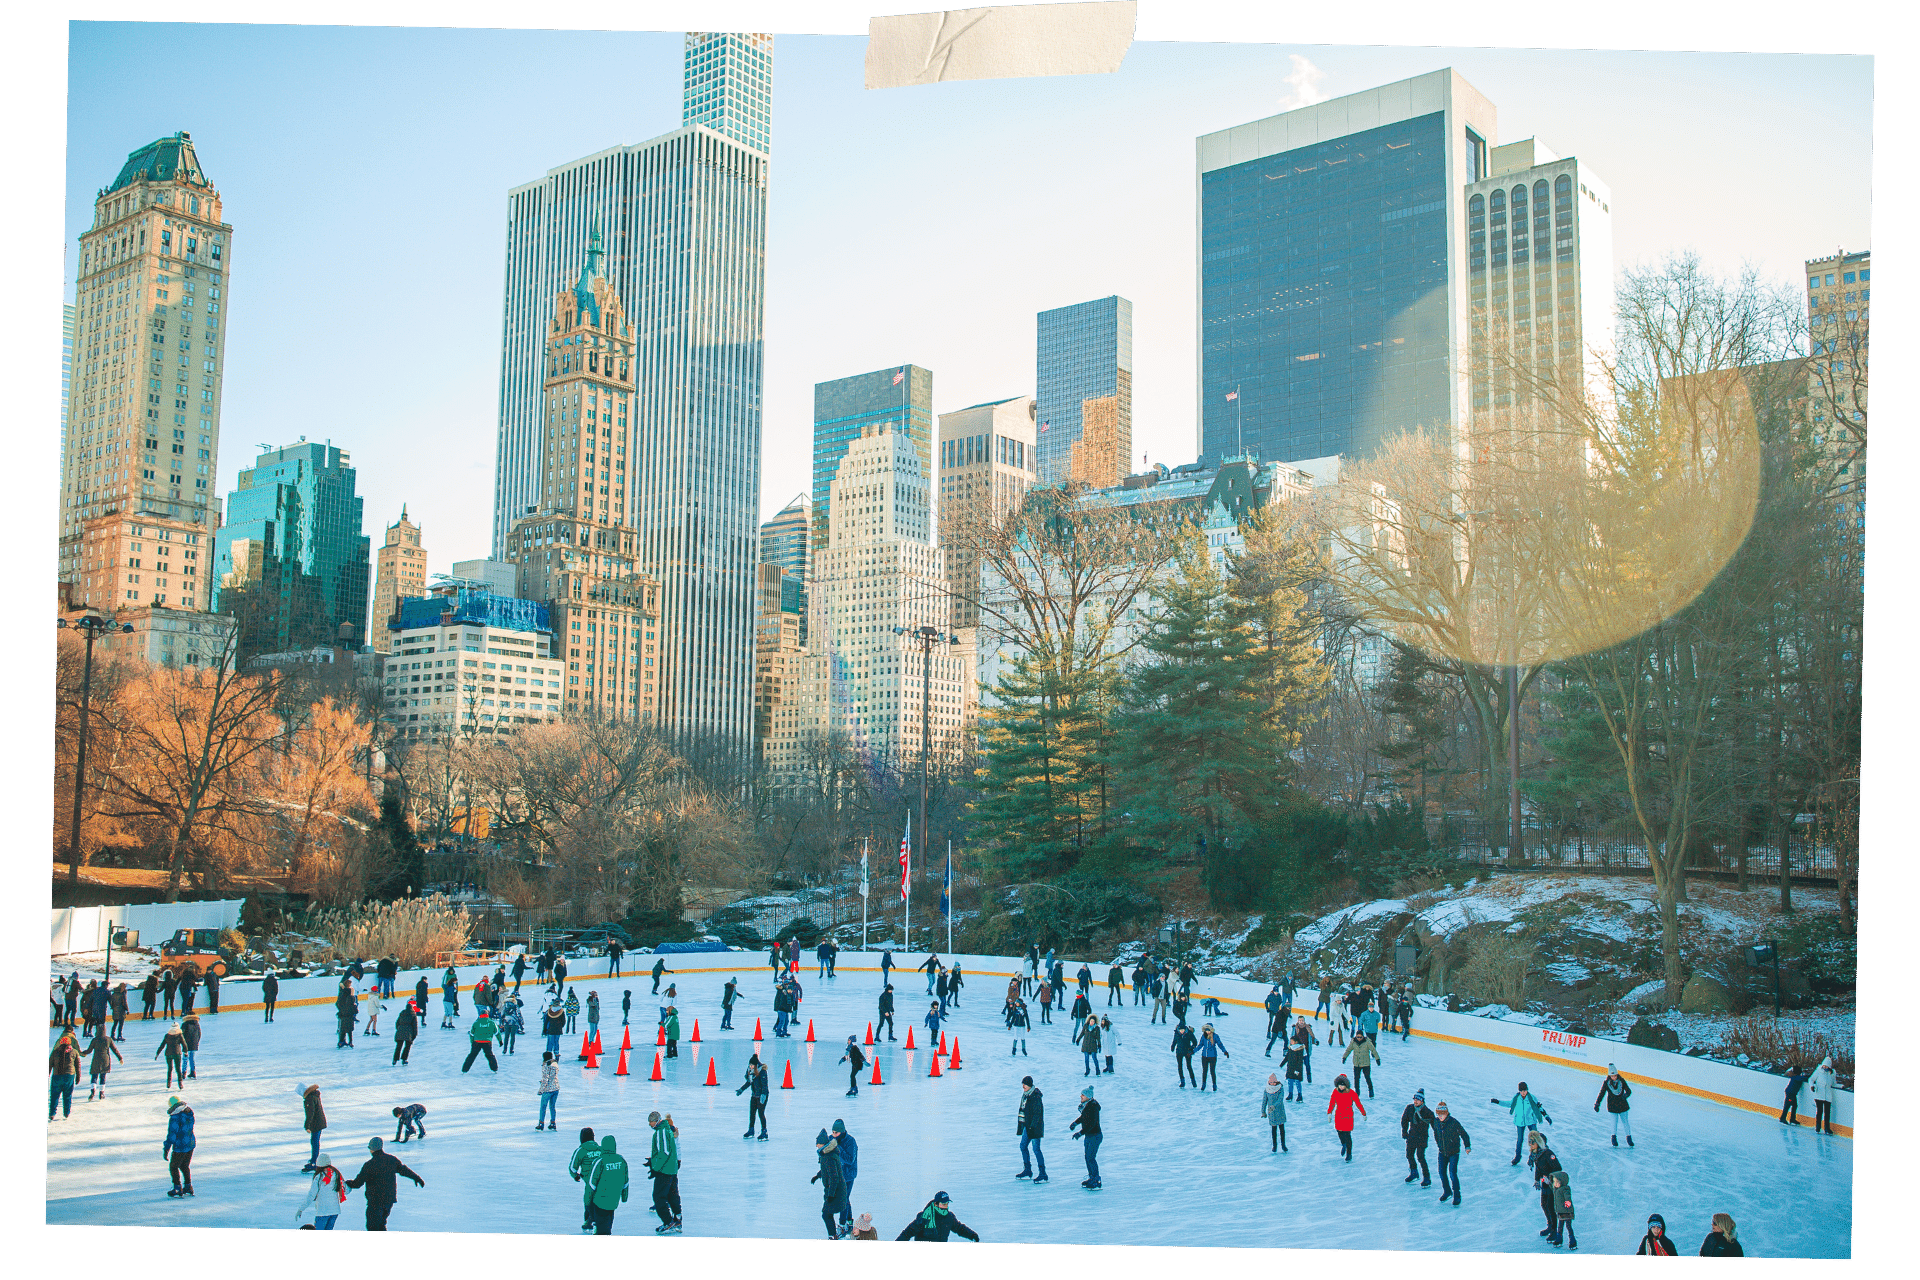 Ice skaters in Central Park, one of 10 things to do for all ages